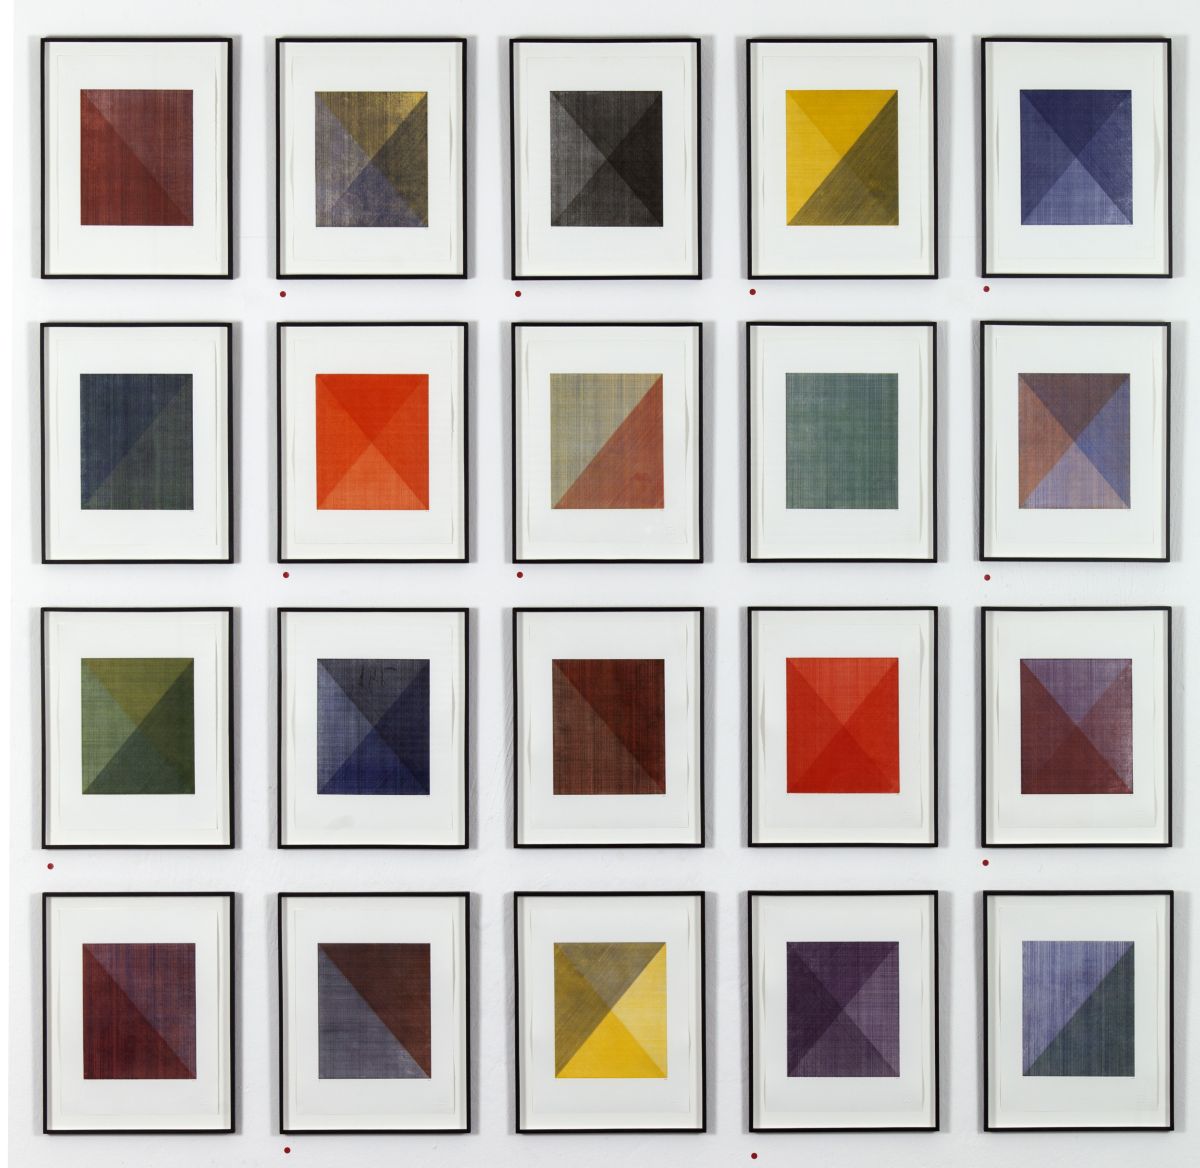 Click the image for a view of: Lake series. Multi-plate colour etchings. Installation view